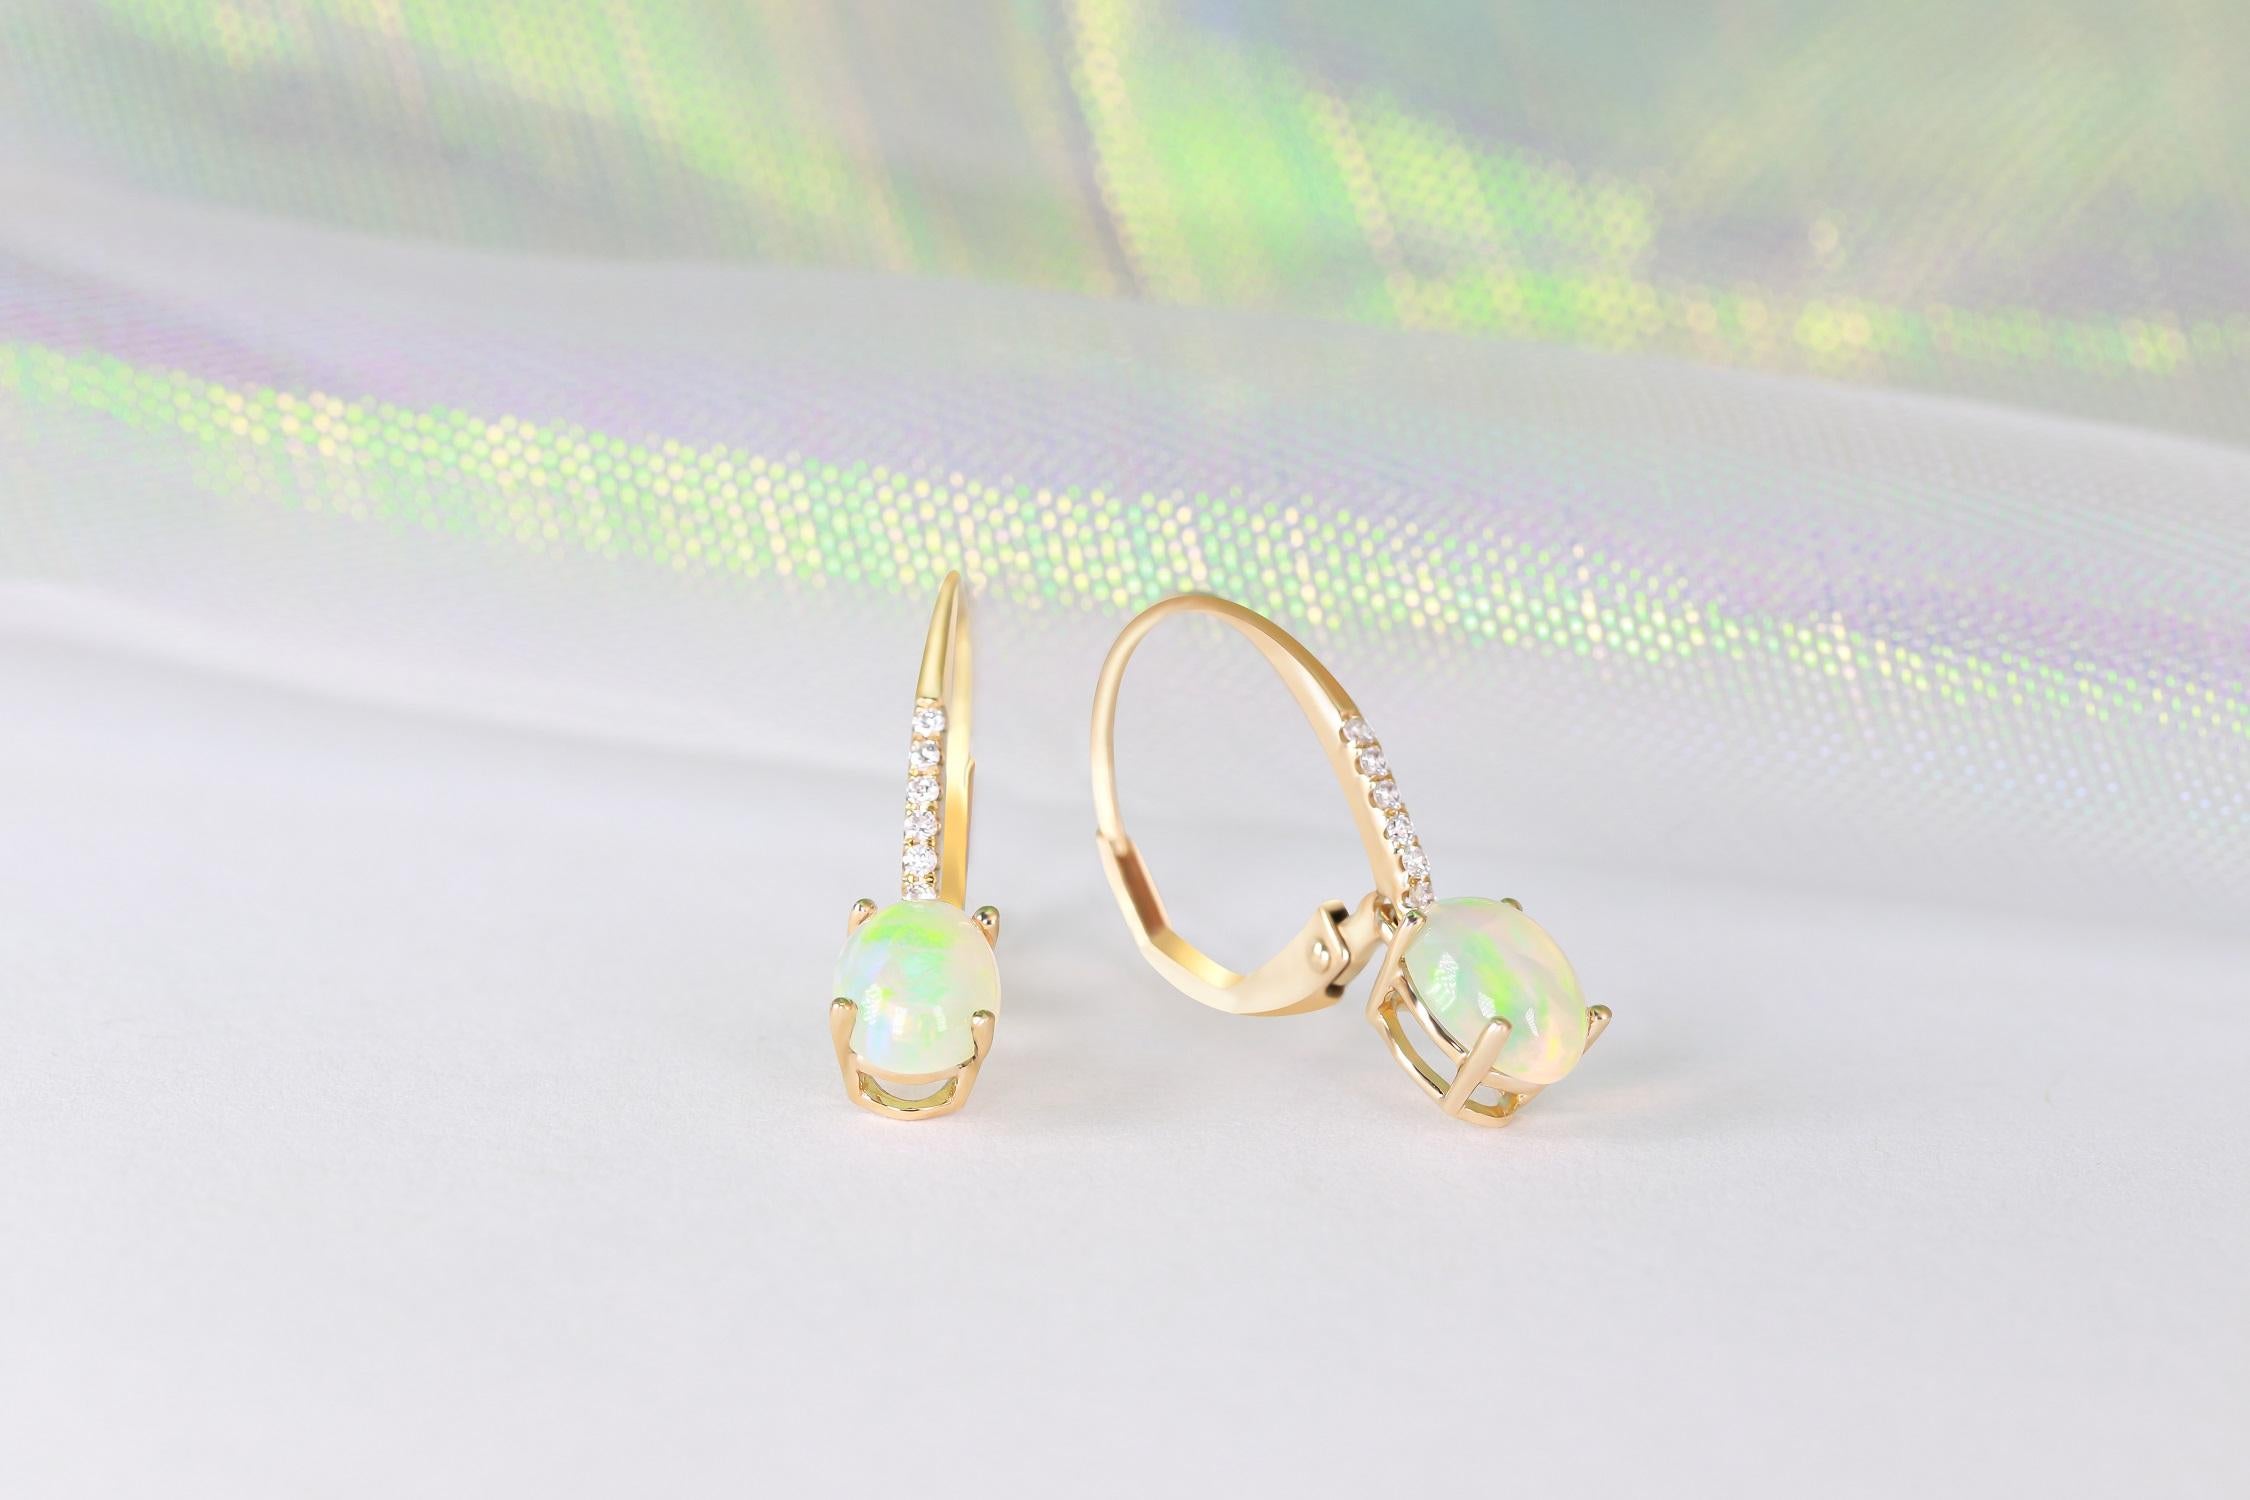 Stunning, timeless and classy eternity Unique Earring. Decorate yourself in luxury with this Gin & Grace Earring. The 14k Yellow Gold jewelry boasts 7x5 Oval Cab Prong Setting Genuine Ethiopian Opal (2 pcs) 1.16 Carat, along with Natural Round cut